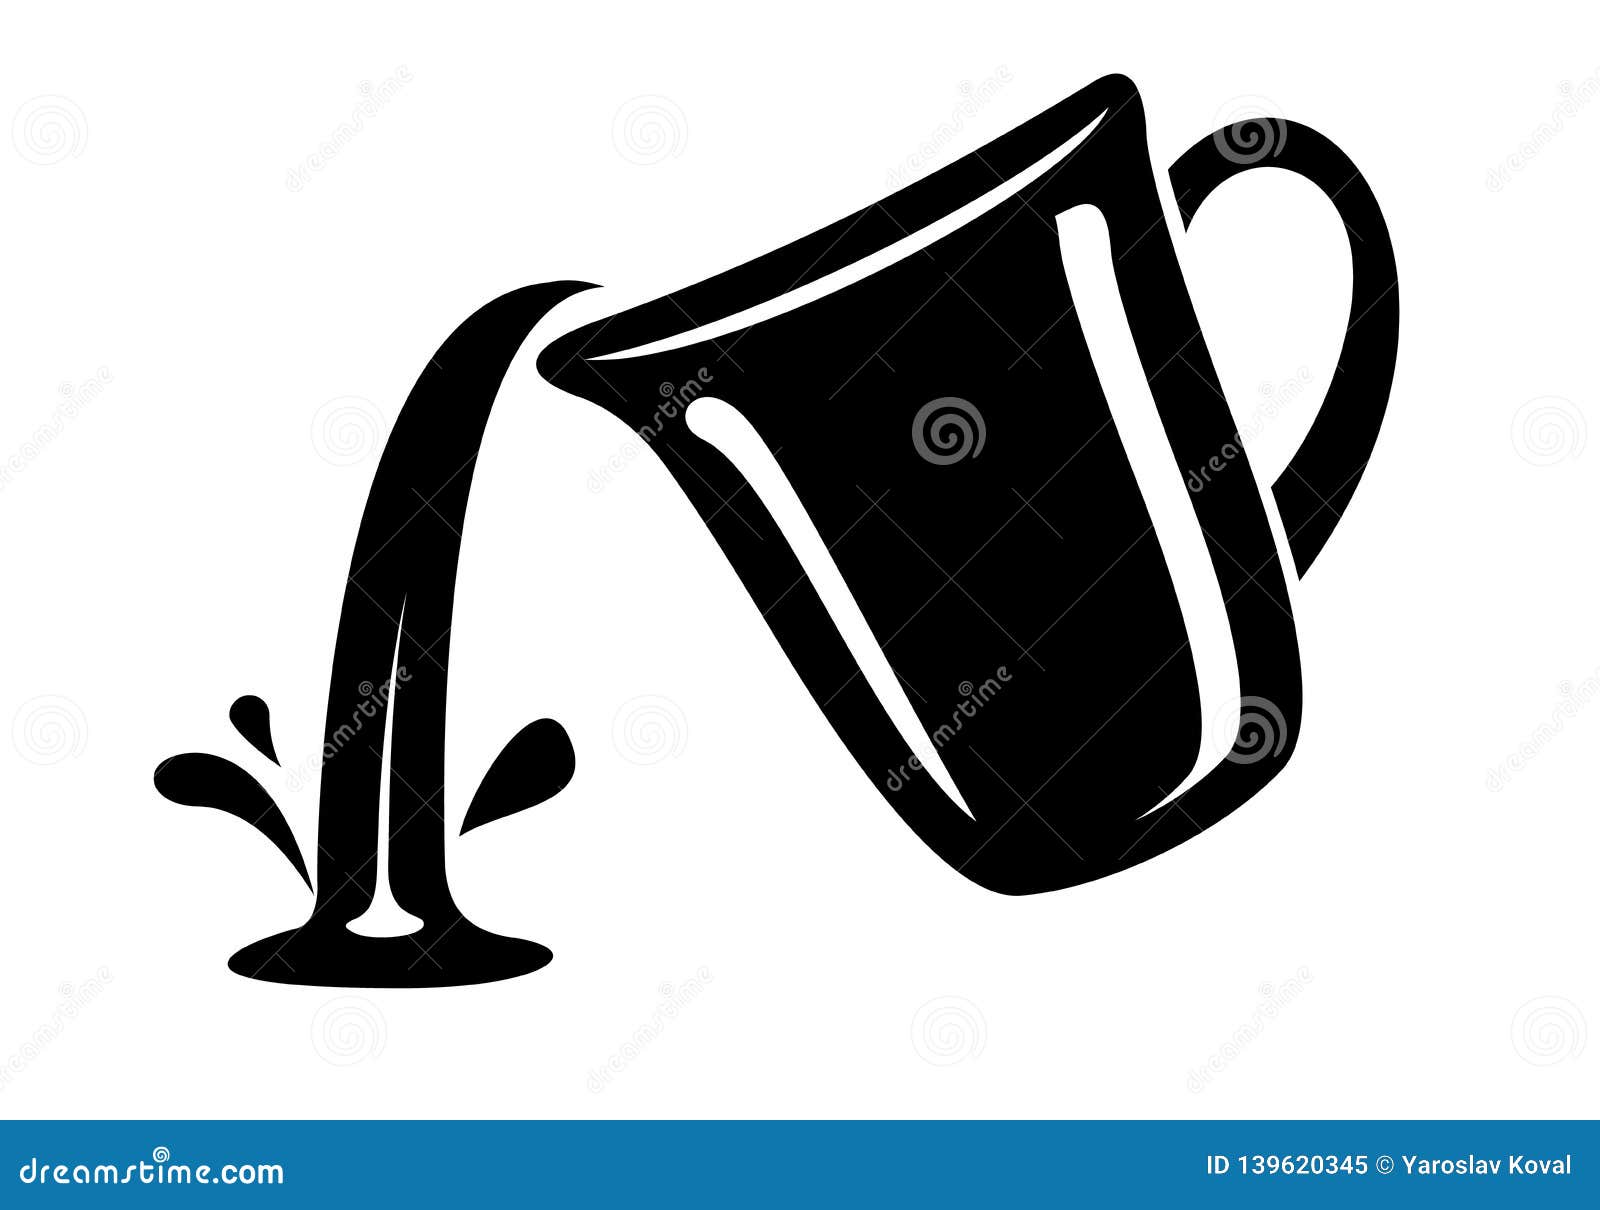 jug pour out milk or water canister. simple logo